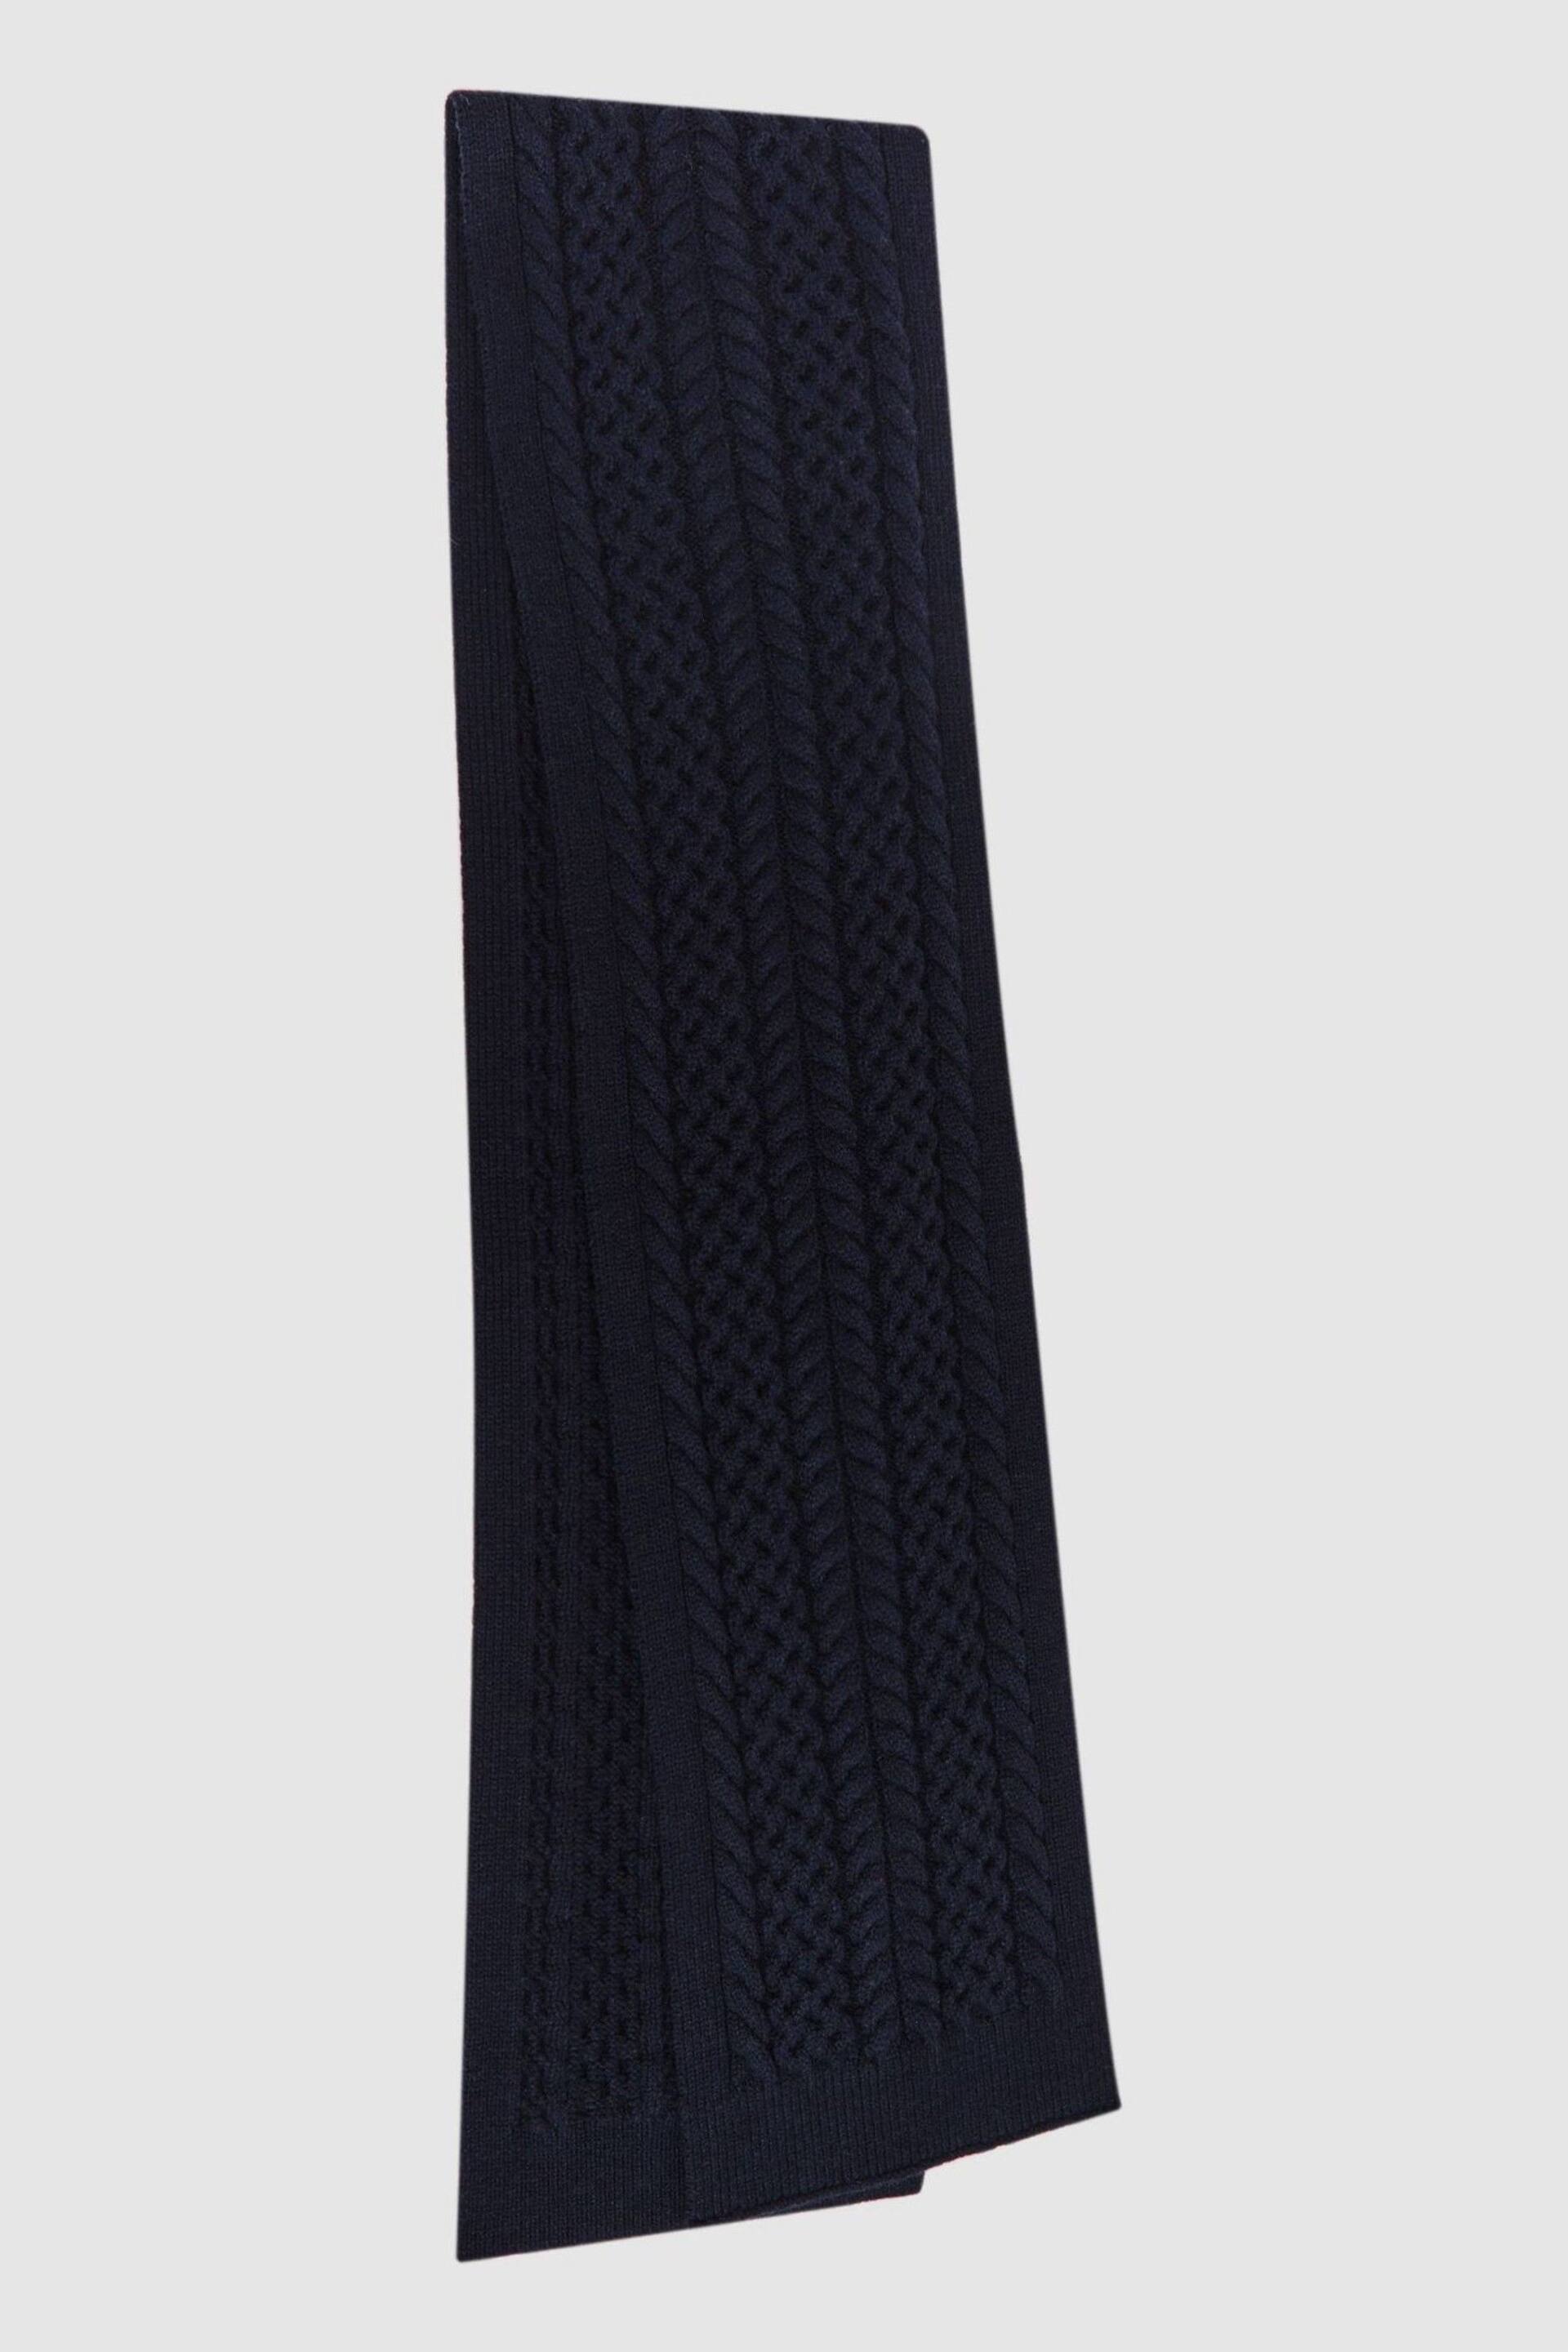 Reiss Navy Heath Senior Knitted Scarf and Beanie Hat Set - Image 4 of 5